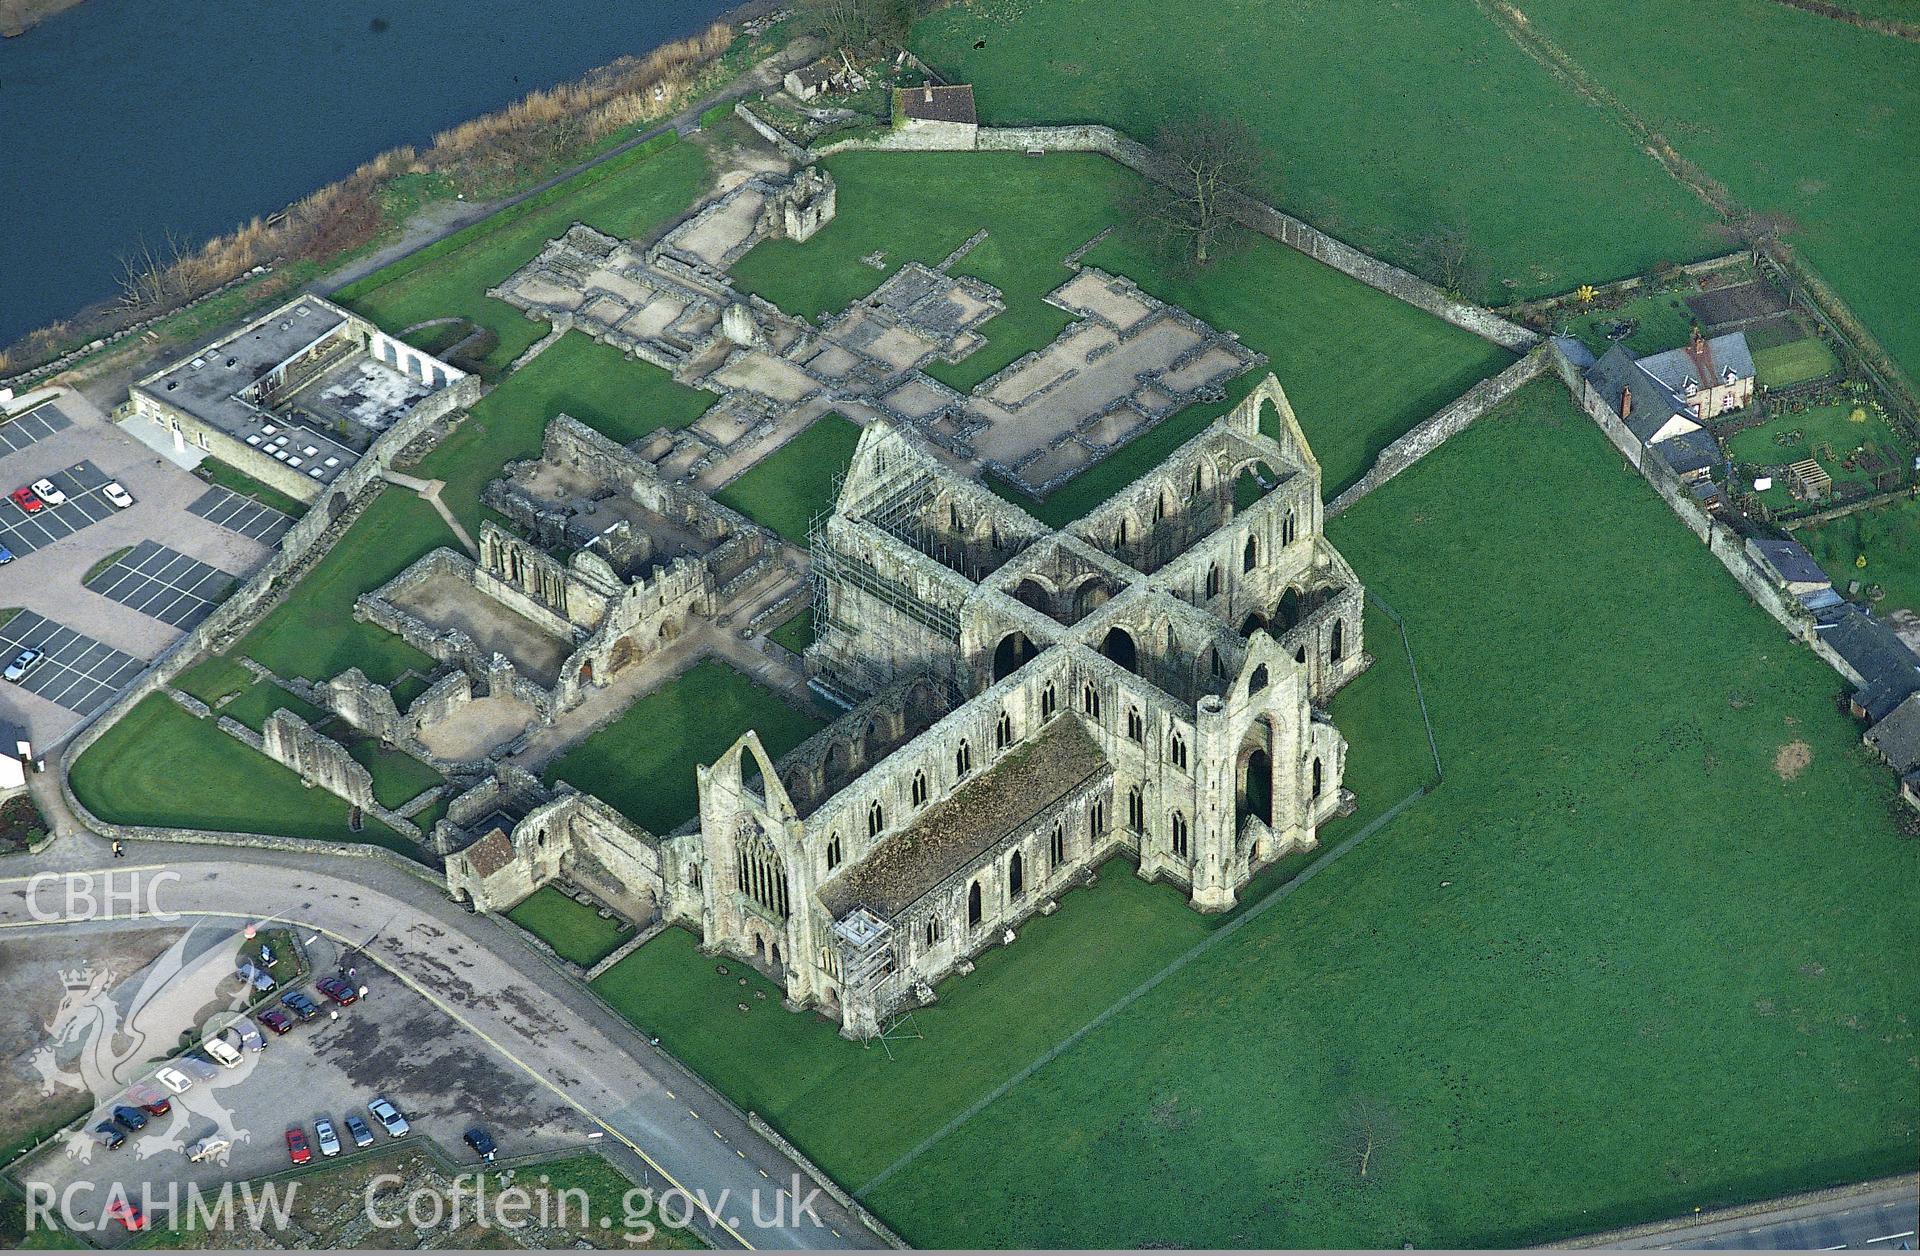 RCAHMW colour slide oblique aerial photograph of Tintern Abbey, Tintern, taken by C.R. Musson, 24/03/94